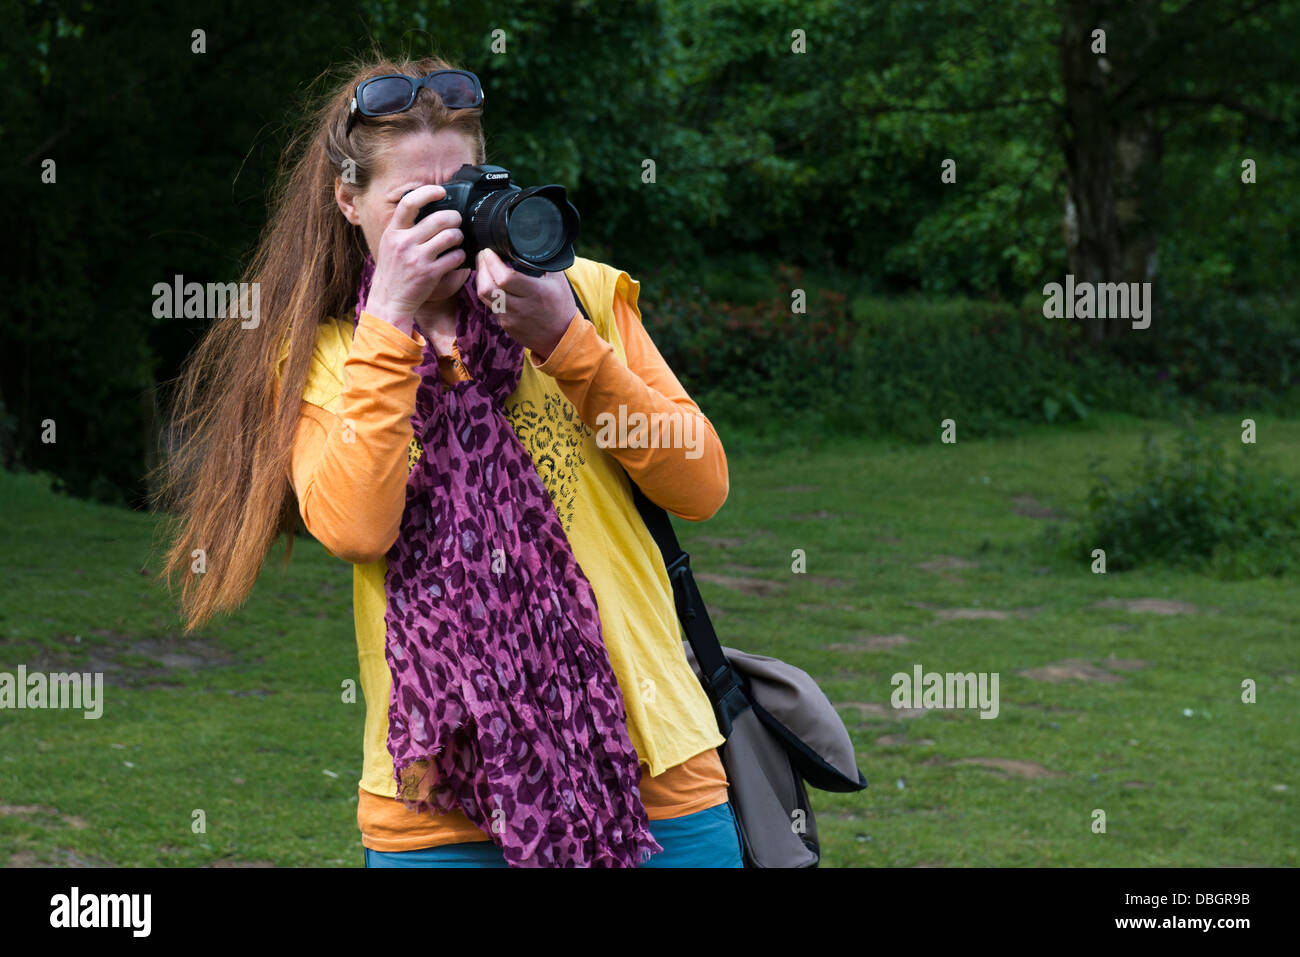 Model released image of a Photographer being photographed on location in the Peak District. Stock Photo